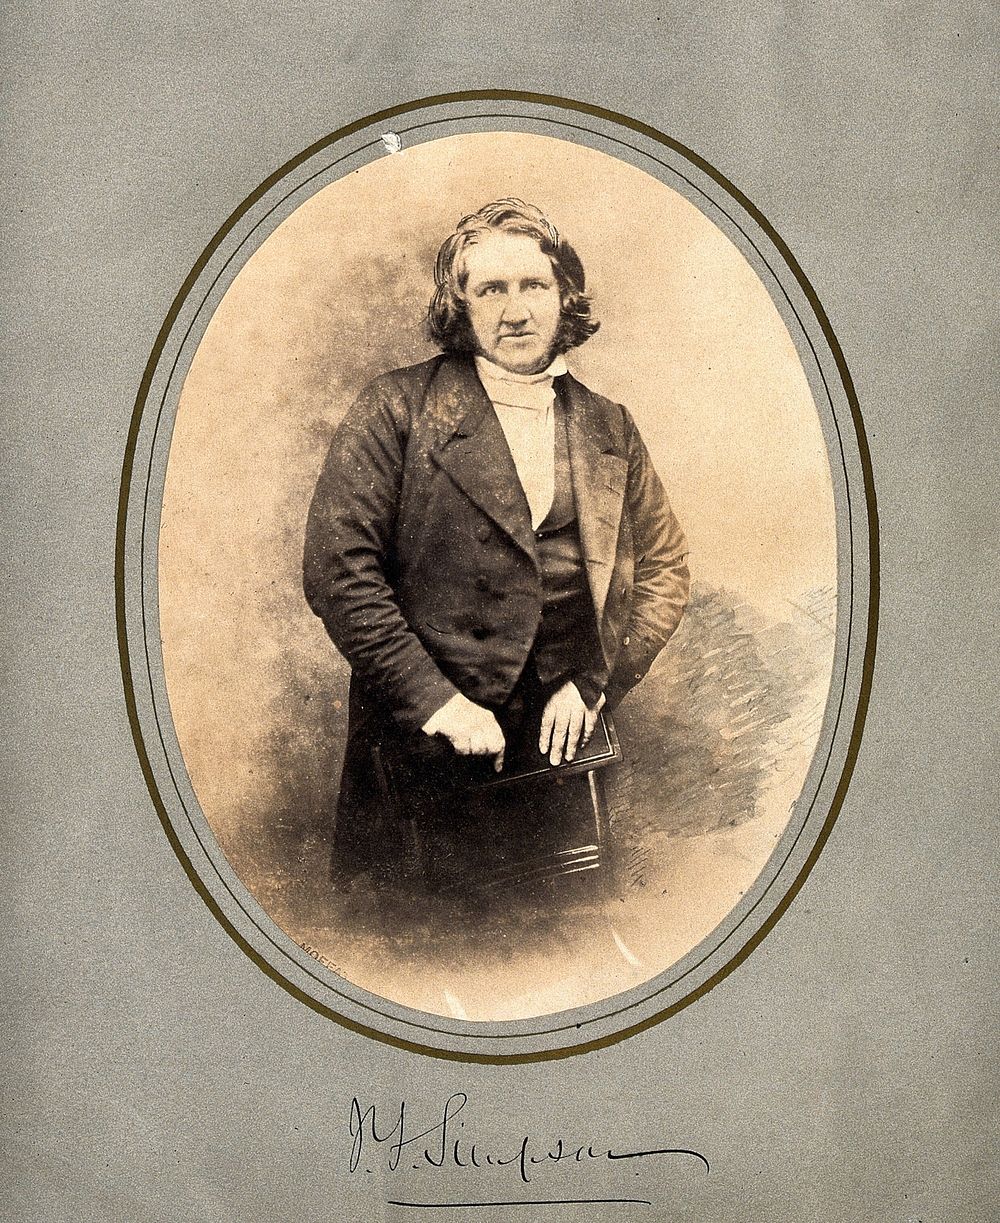 M0001301: Reproduction of a portrait of Sir James Young Simpson (1811-1870). Original photograph by J. Moffat